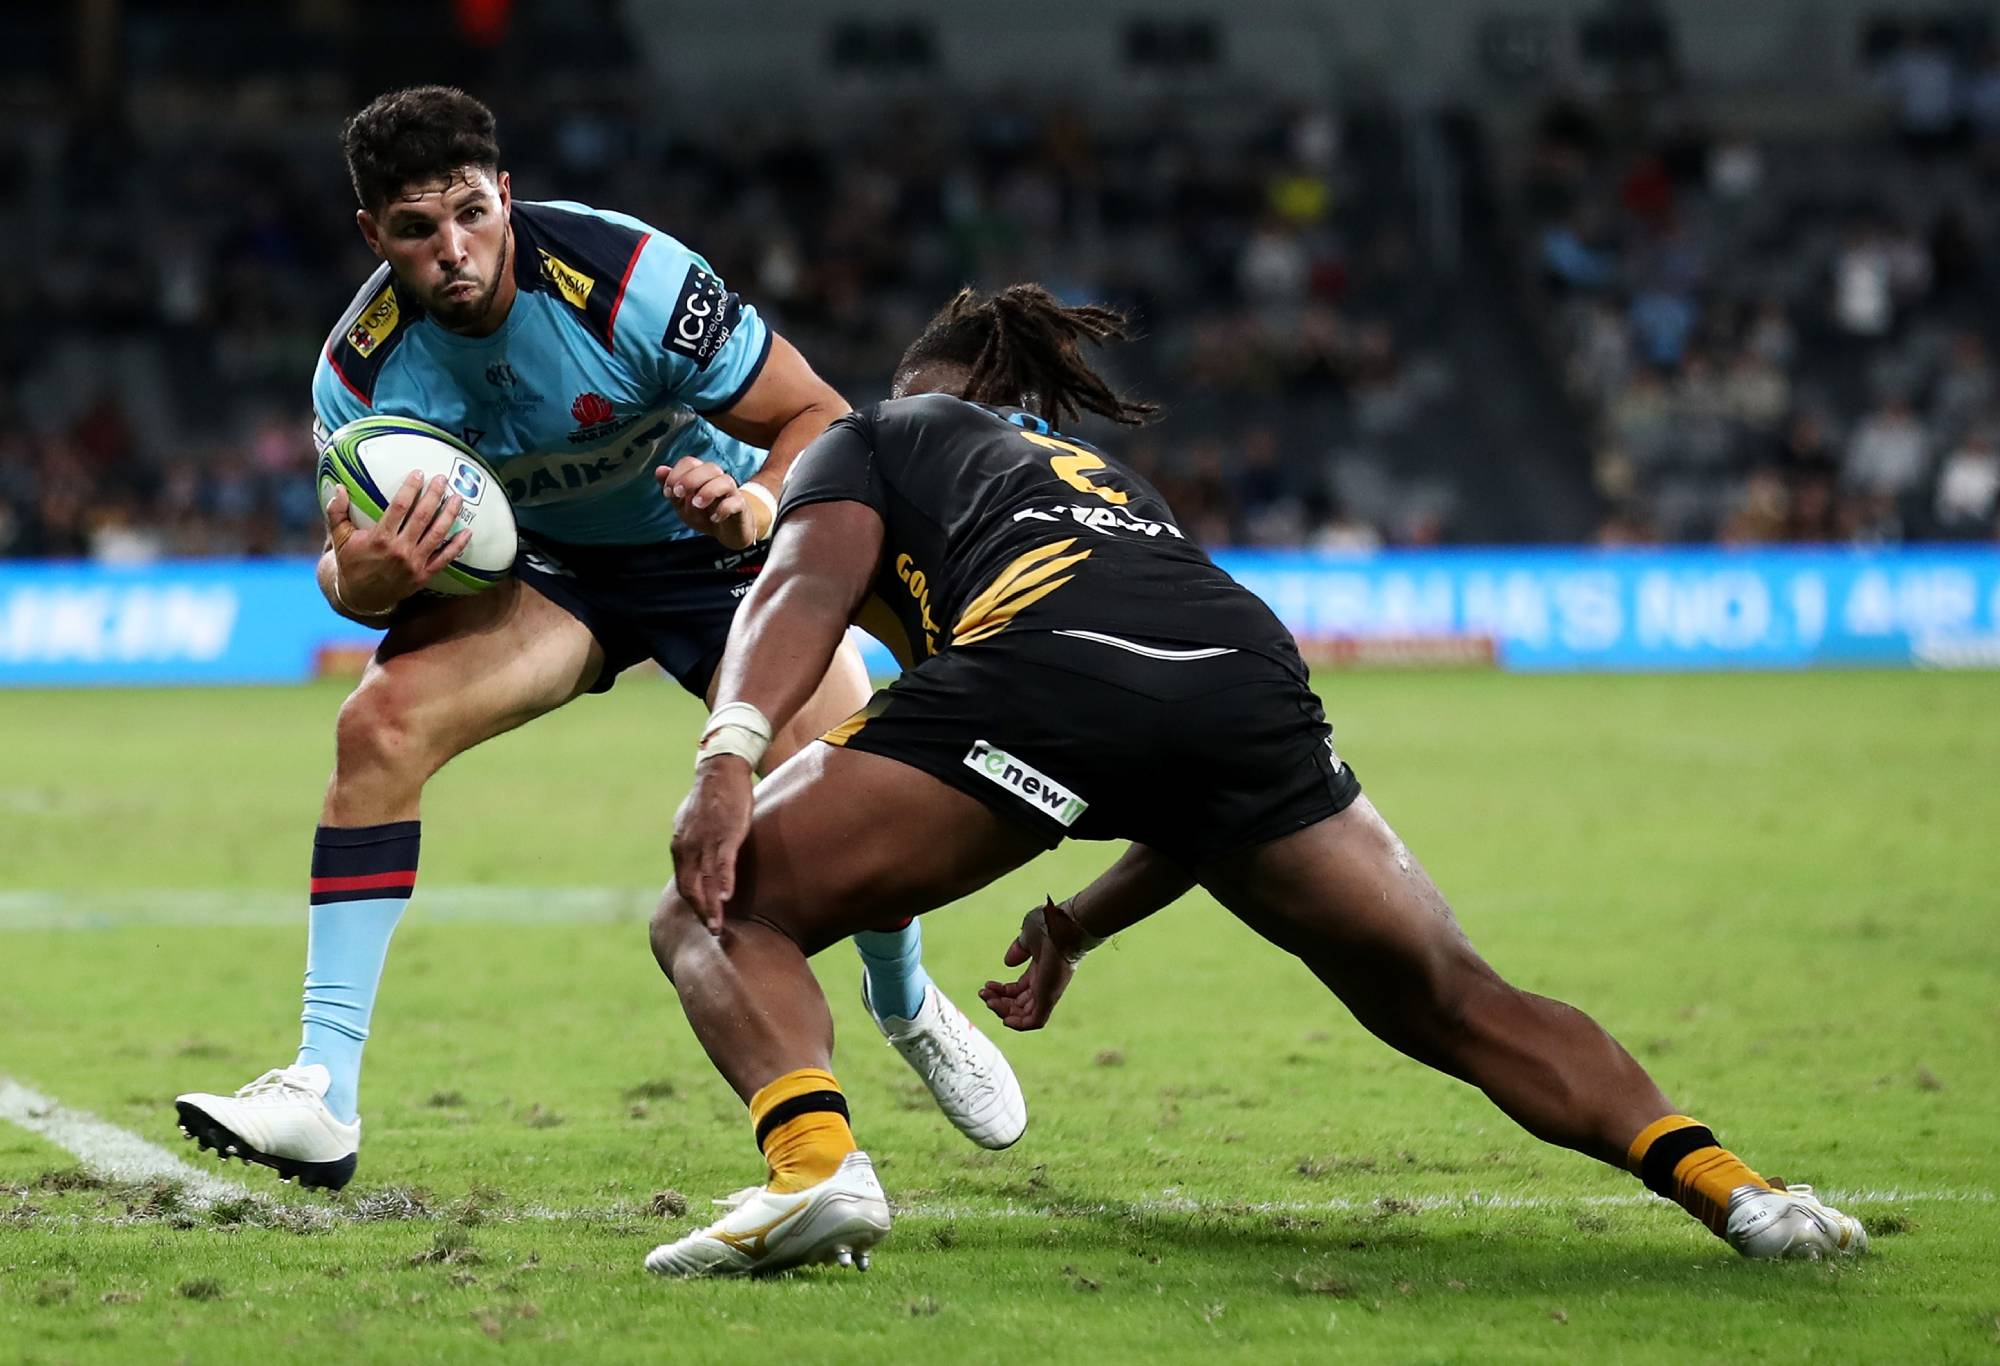 SYDNEY, AUSTRALIA - MARCH 05: Triston Reilly of the Waratahs is tackled during the round three Super RugbyAU match between the Waratahs and the Western Force at Bankwest Stadium, on March 05, 2021, in Sydney, Australia. (Photo by Cameron Spencer/Getty Images)